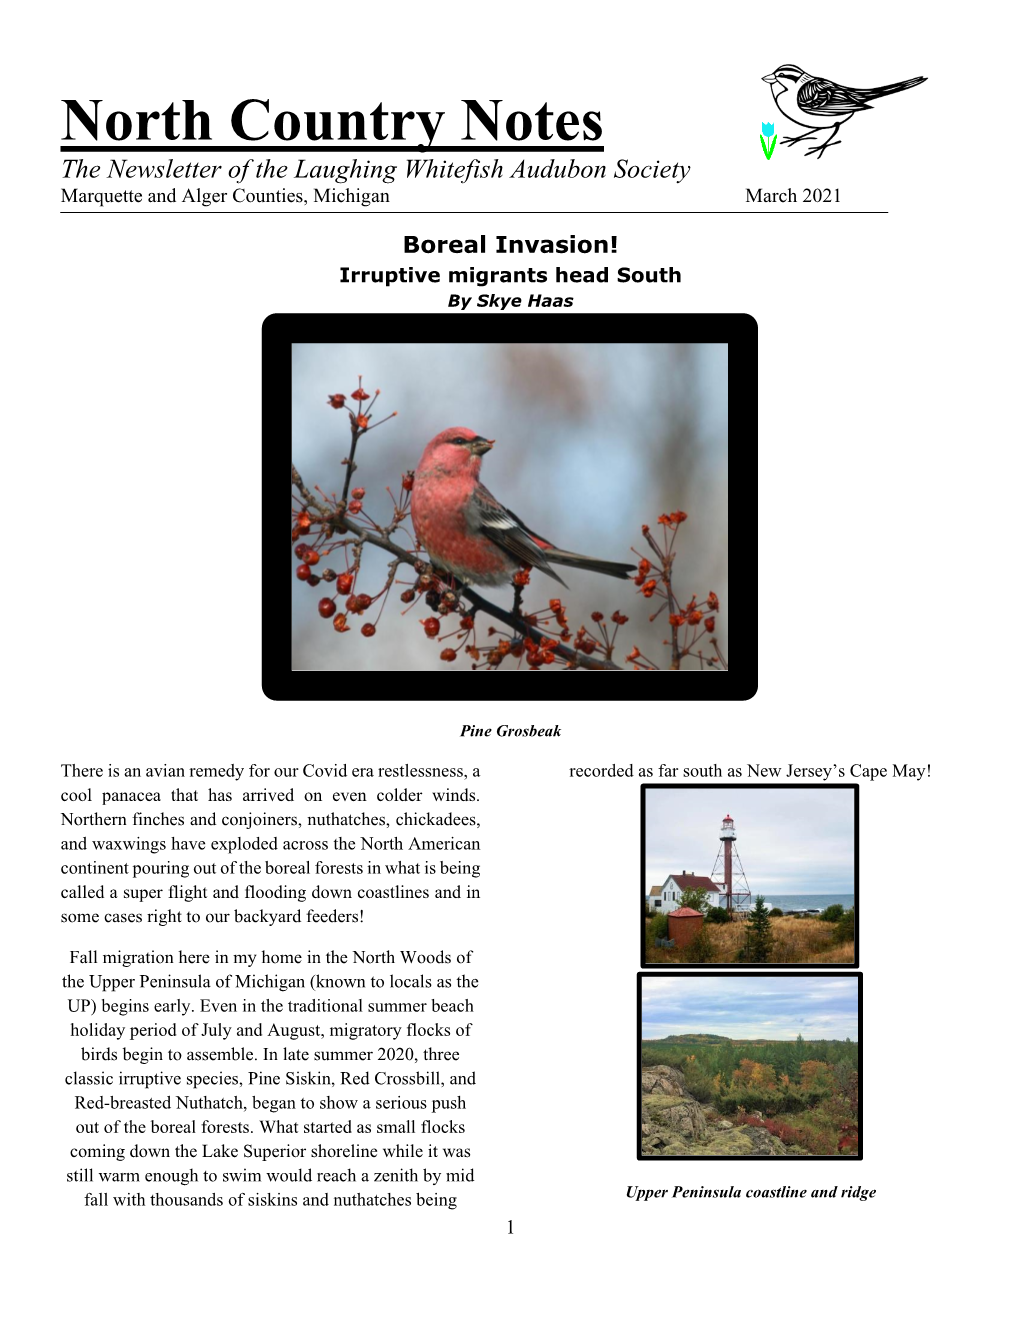 North Country Notes the Newsletter of the Laughing Whitefish Audubon Society Marquette and Alger Counties, Michigan March 2021